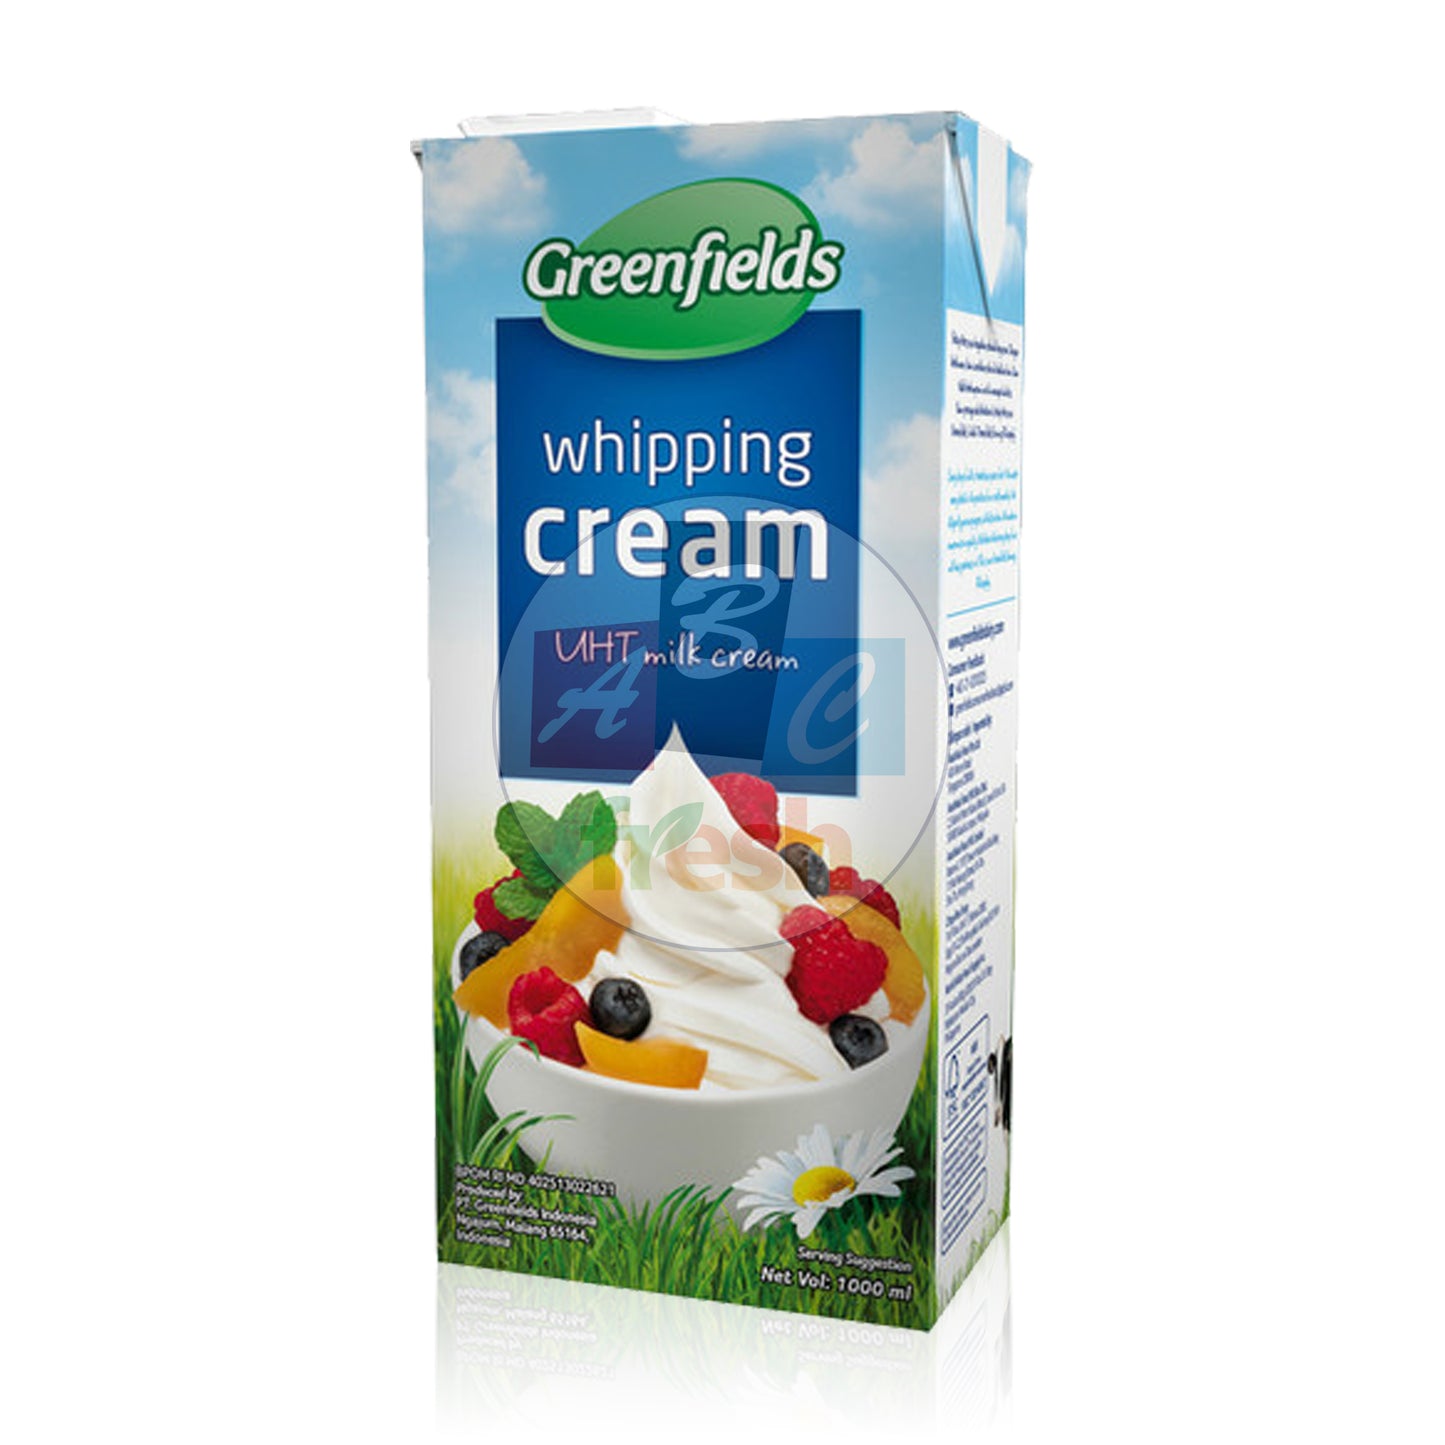 GREENFIELDS WHIPPING CREAM 1L